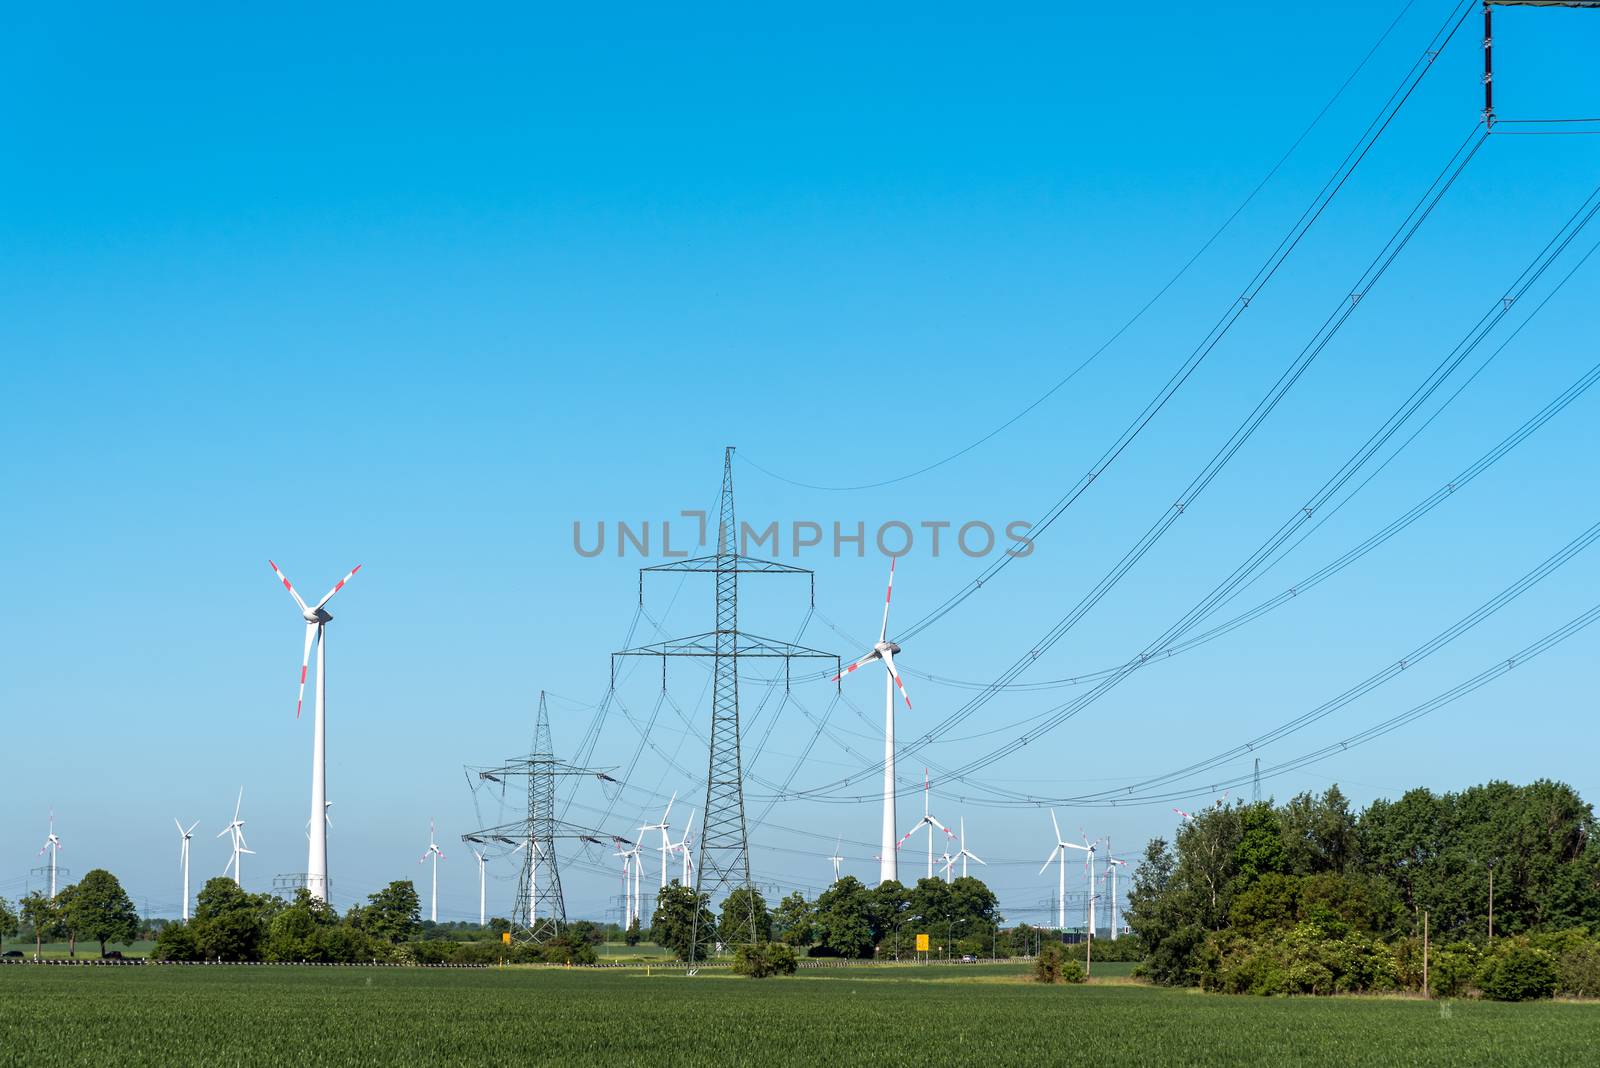 Windwheels and power transmission lines seen in rural Germany